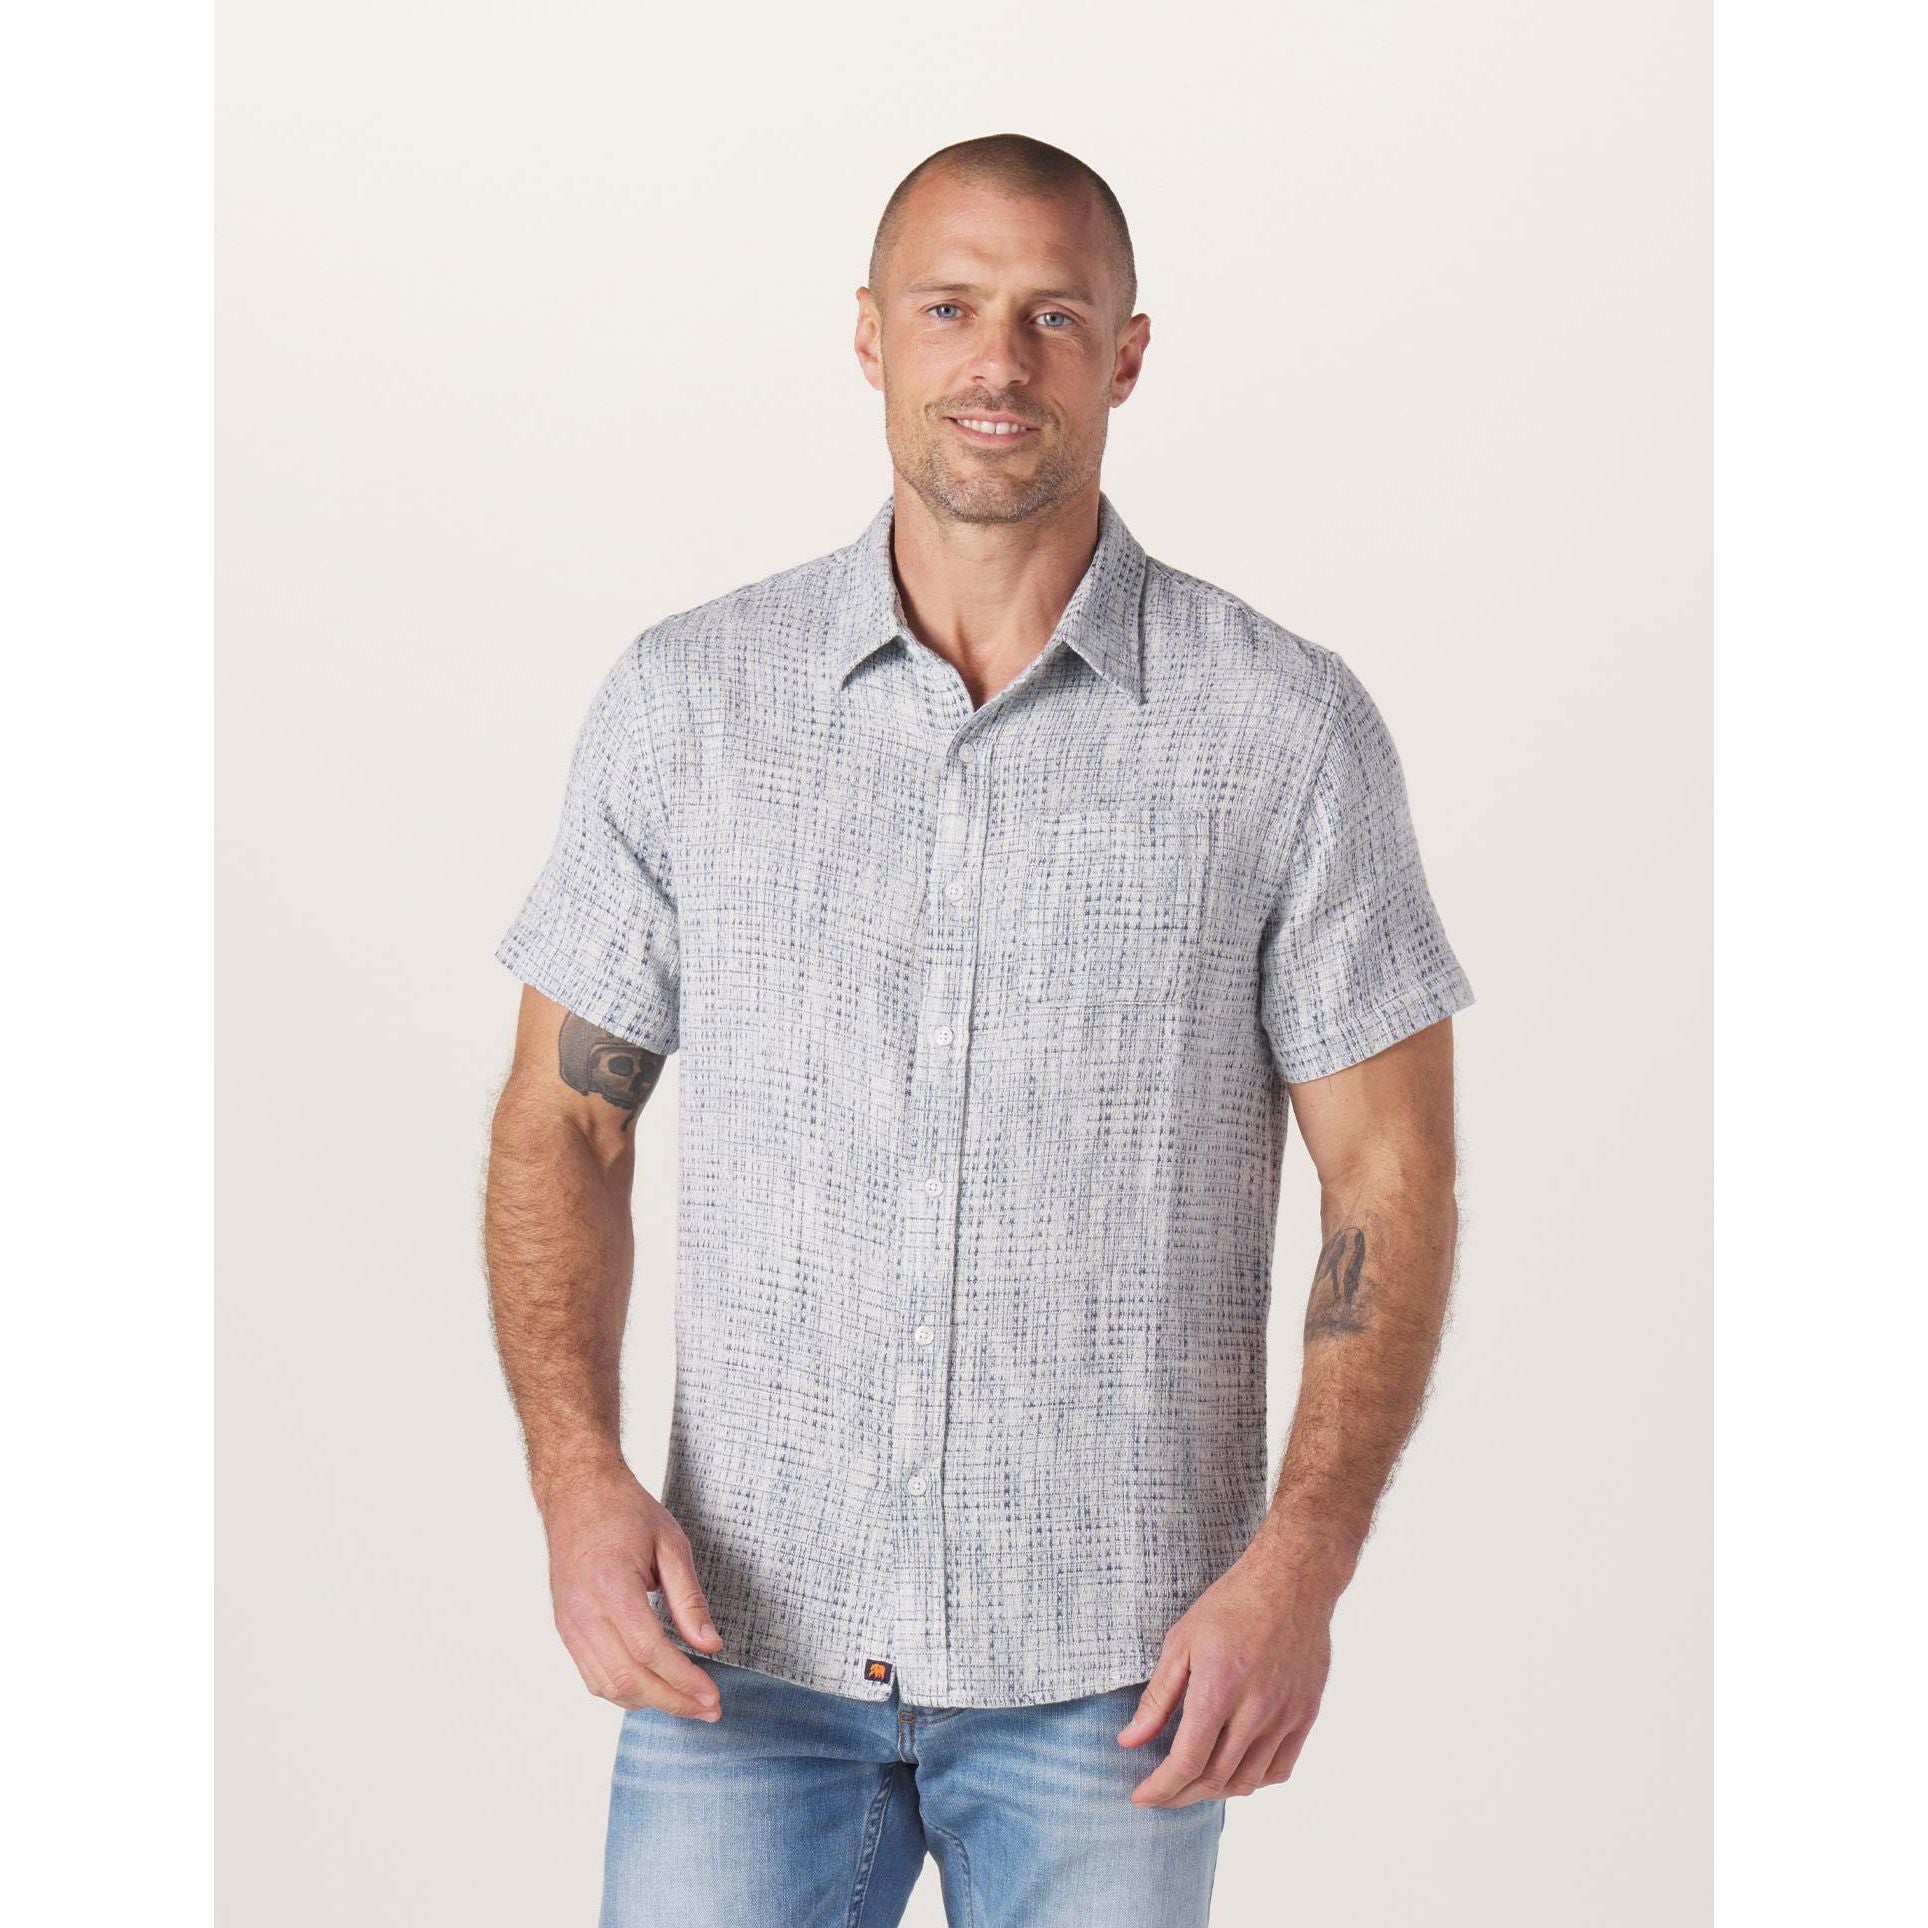 Normal Brand - Freshwater Short Sleeve Button Up Shirt in Blue Multi